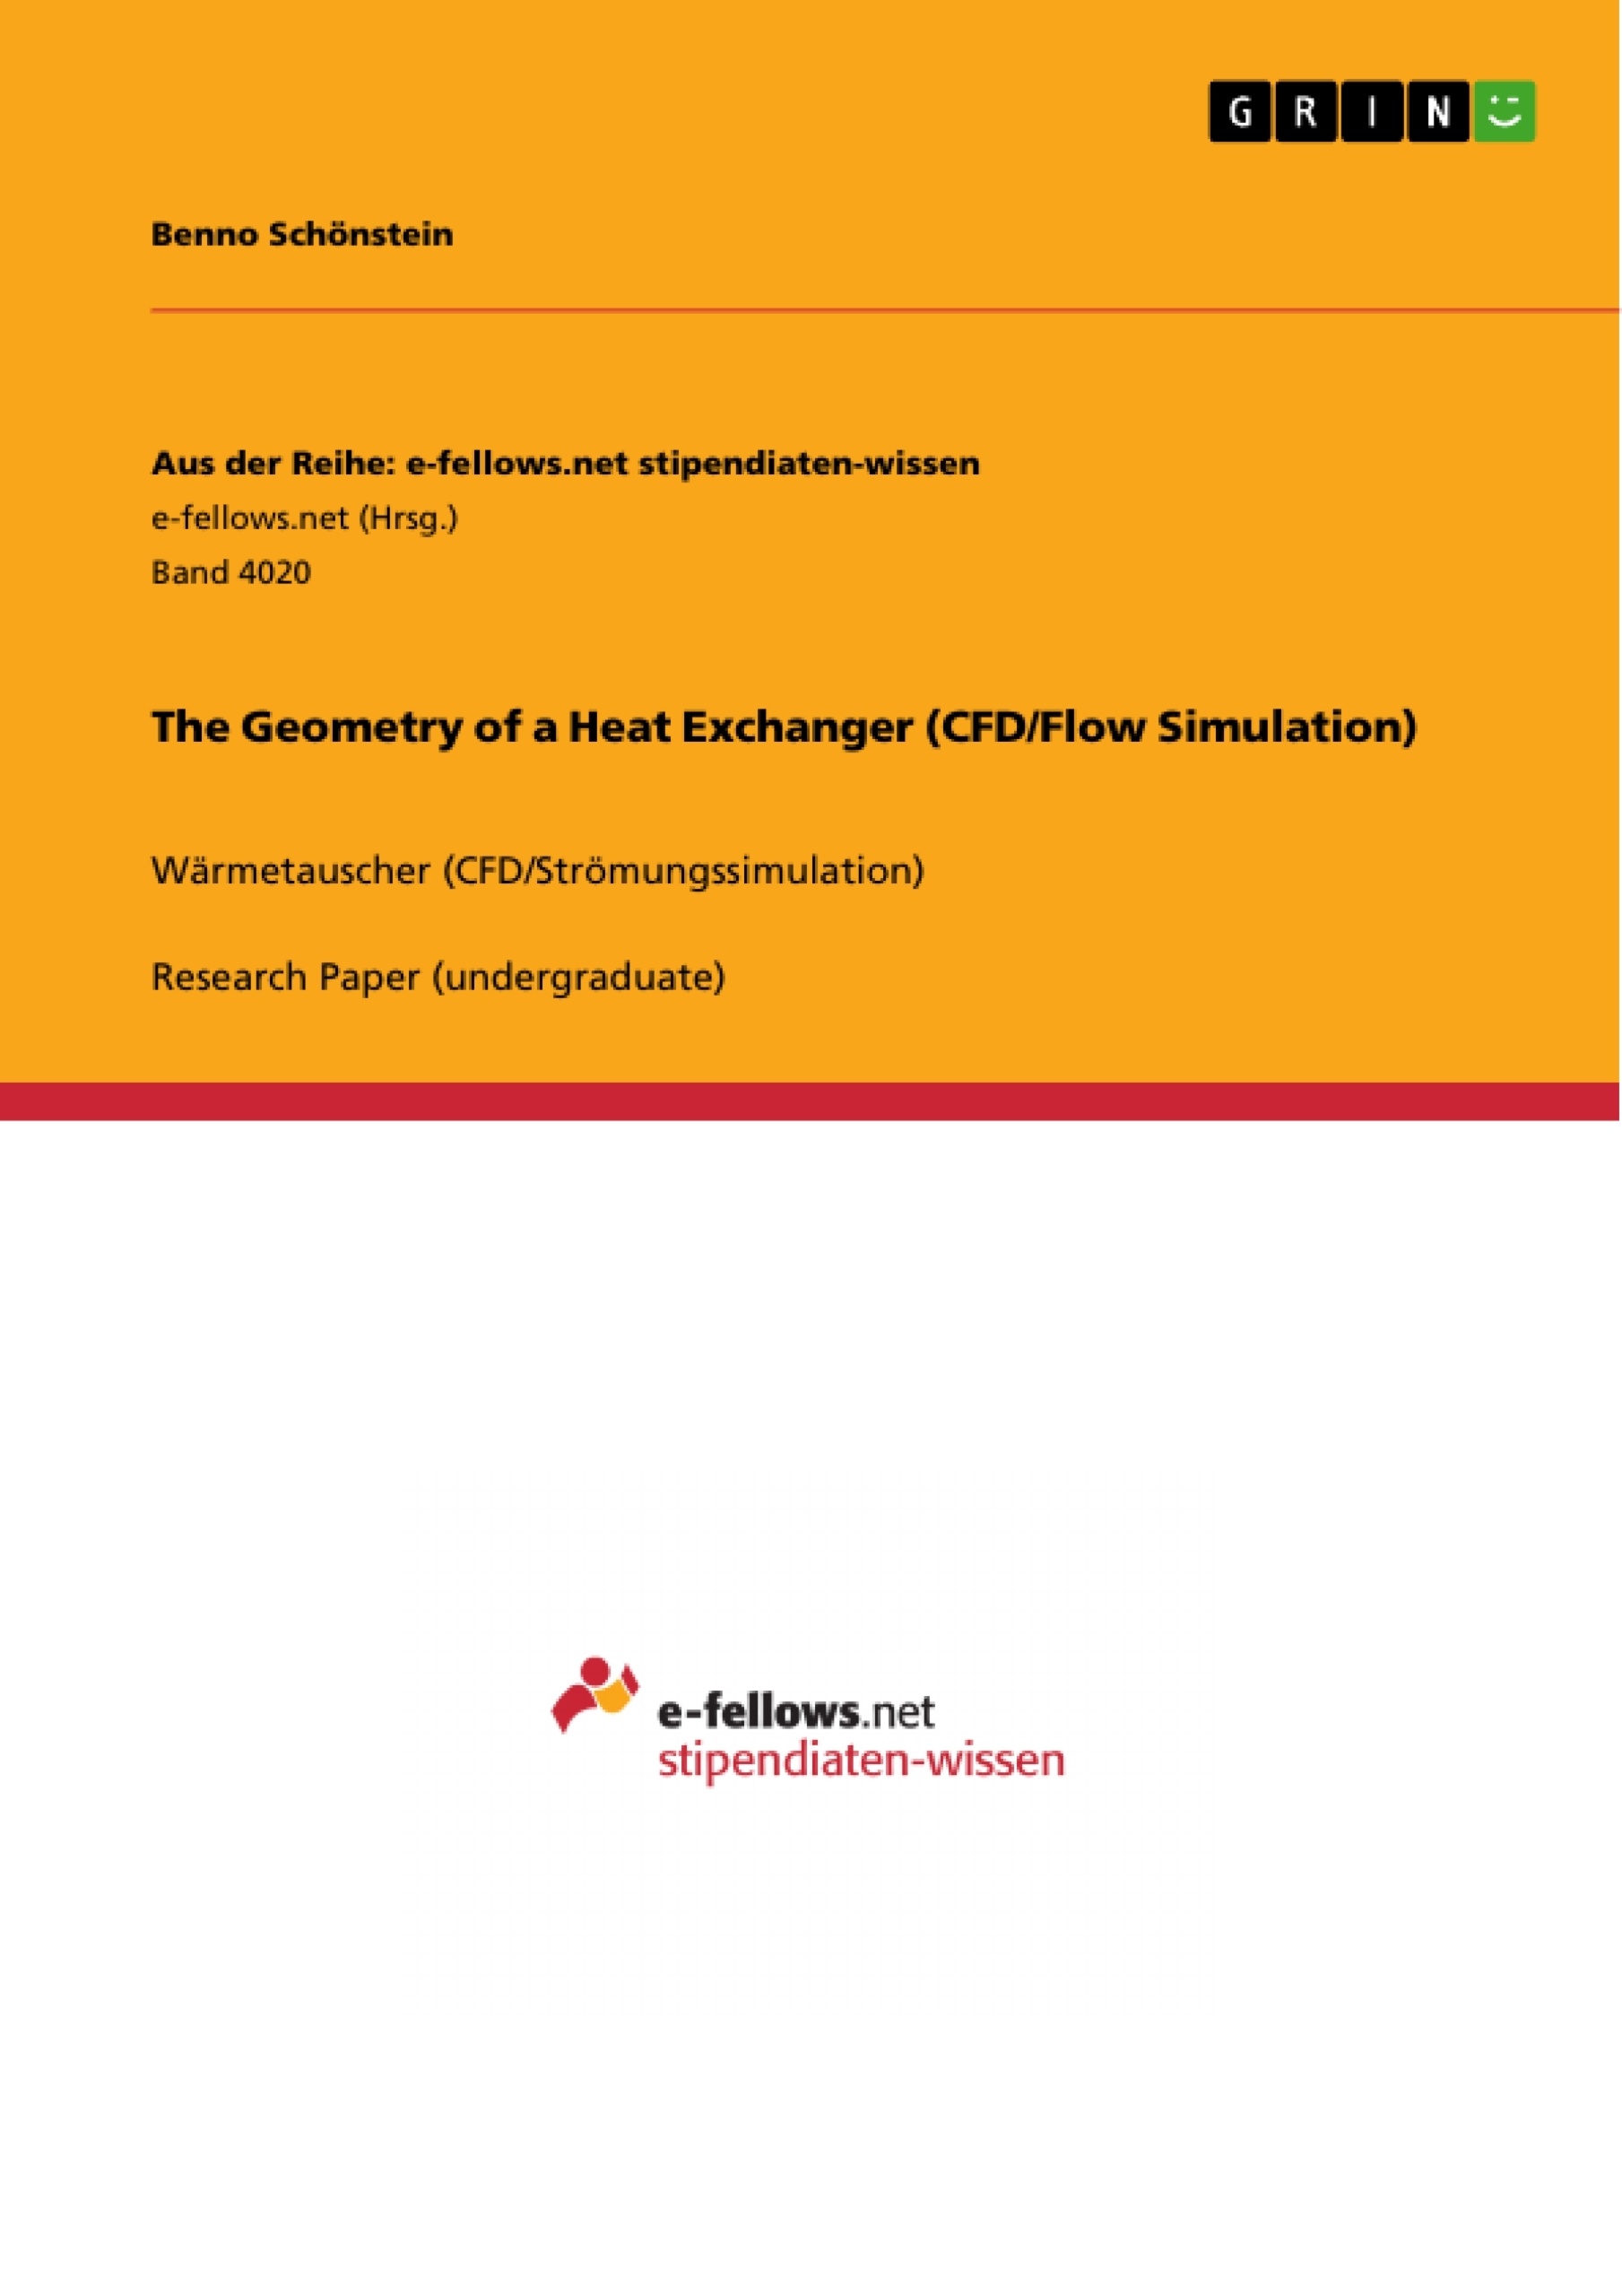 Title: The Geometry of a Heat Exchanger (CFD/Flow Simulation)